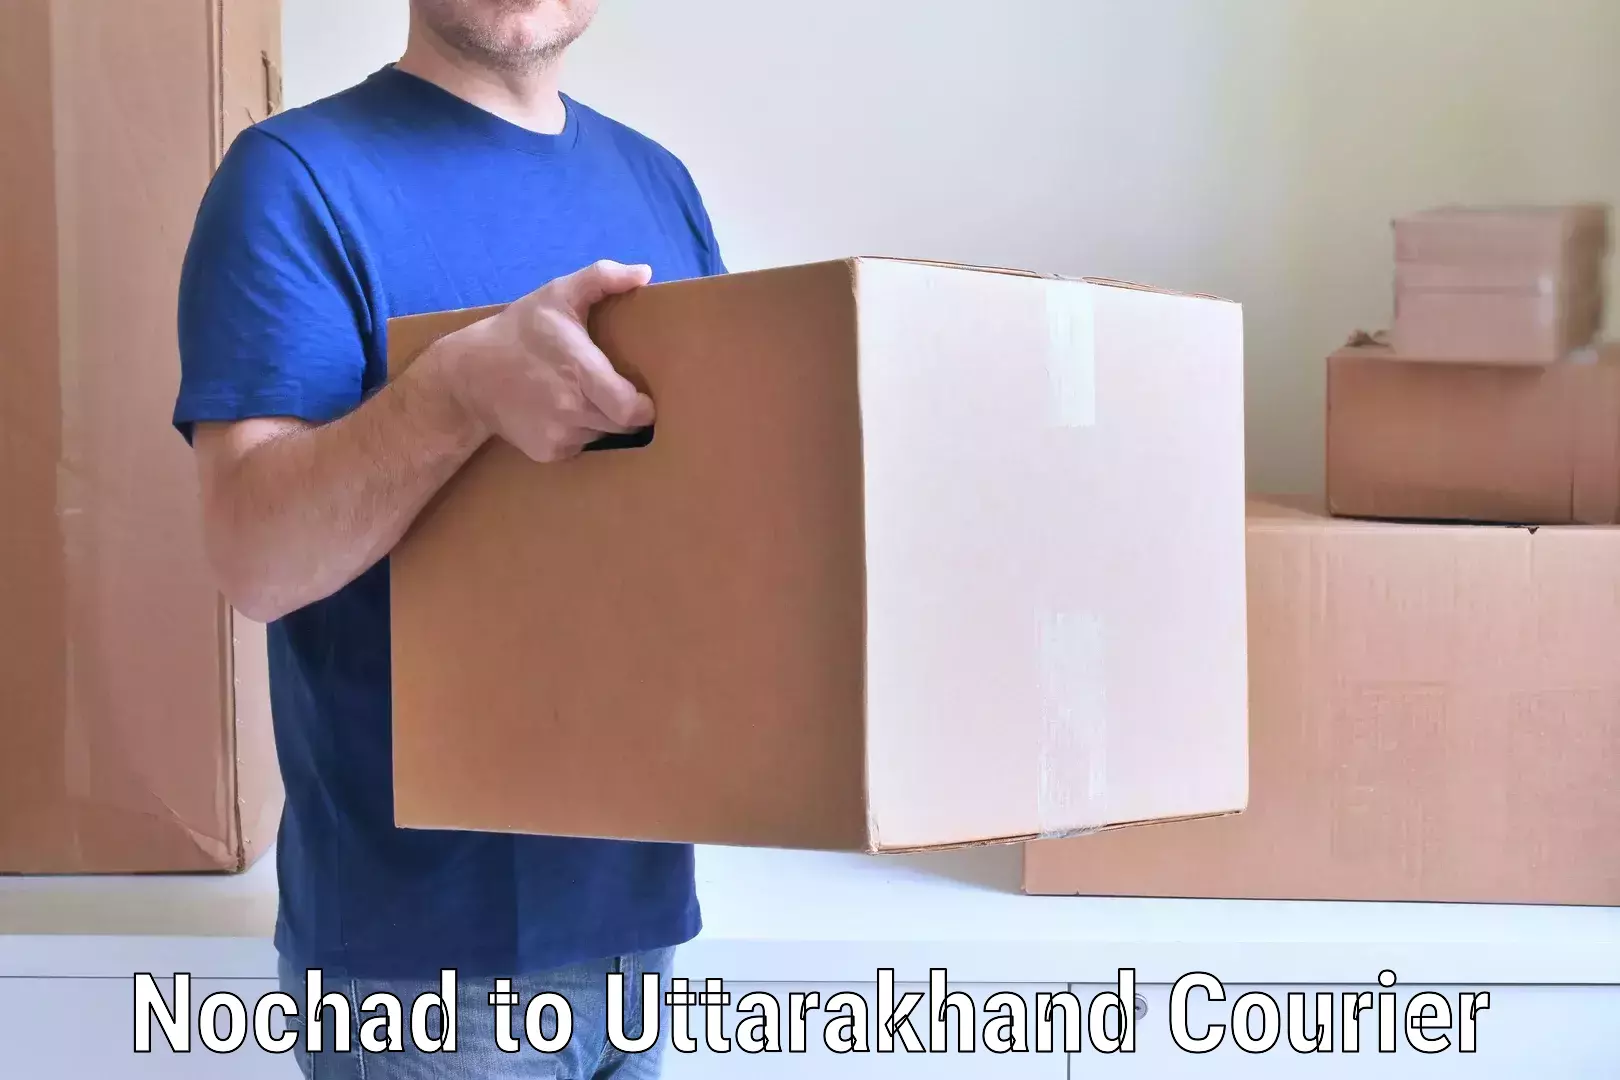 Furniture delivery service Nochad to Dwarahat